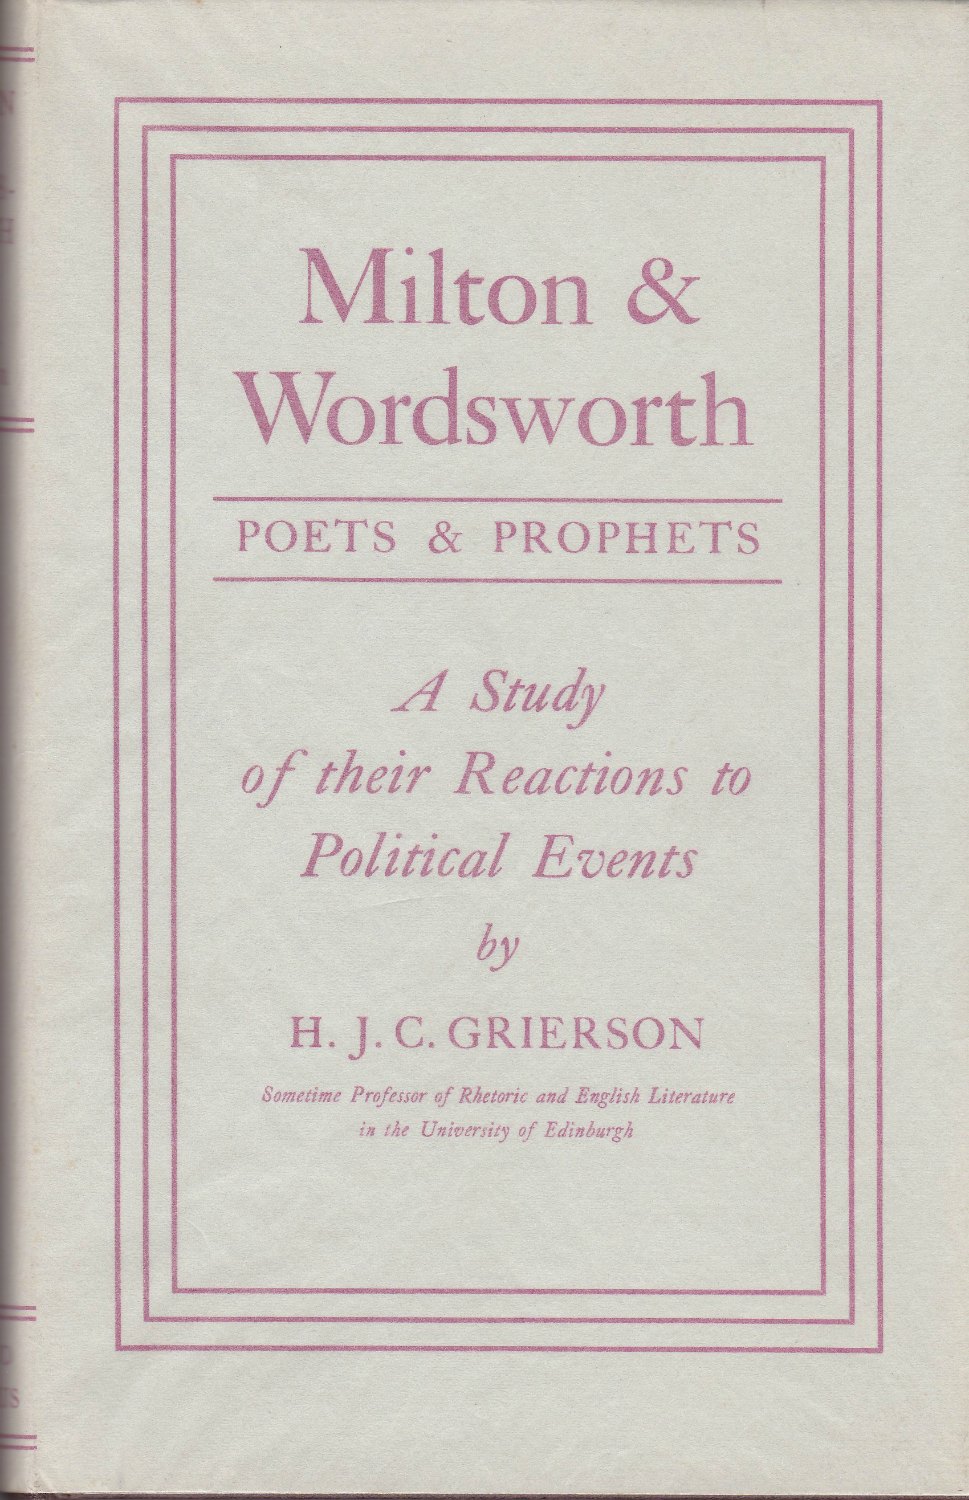 Milton & Wordsworth, poets and prophets : a study of their reactions to political events.